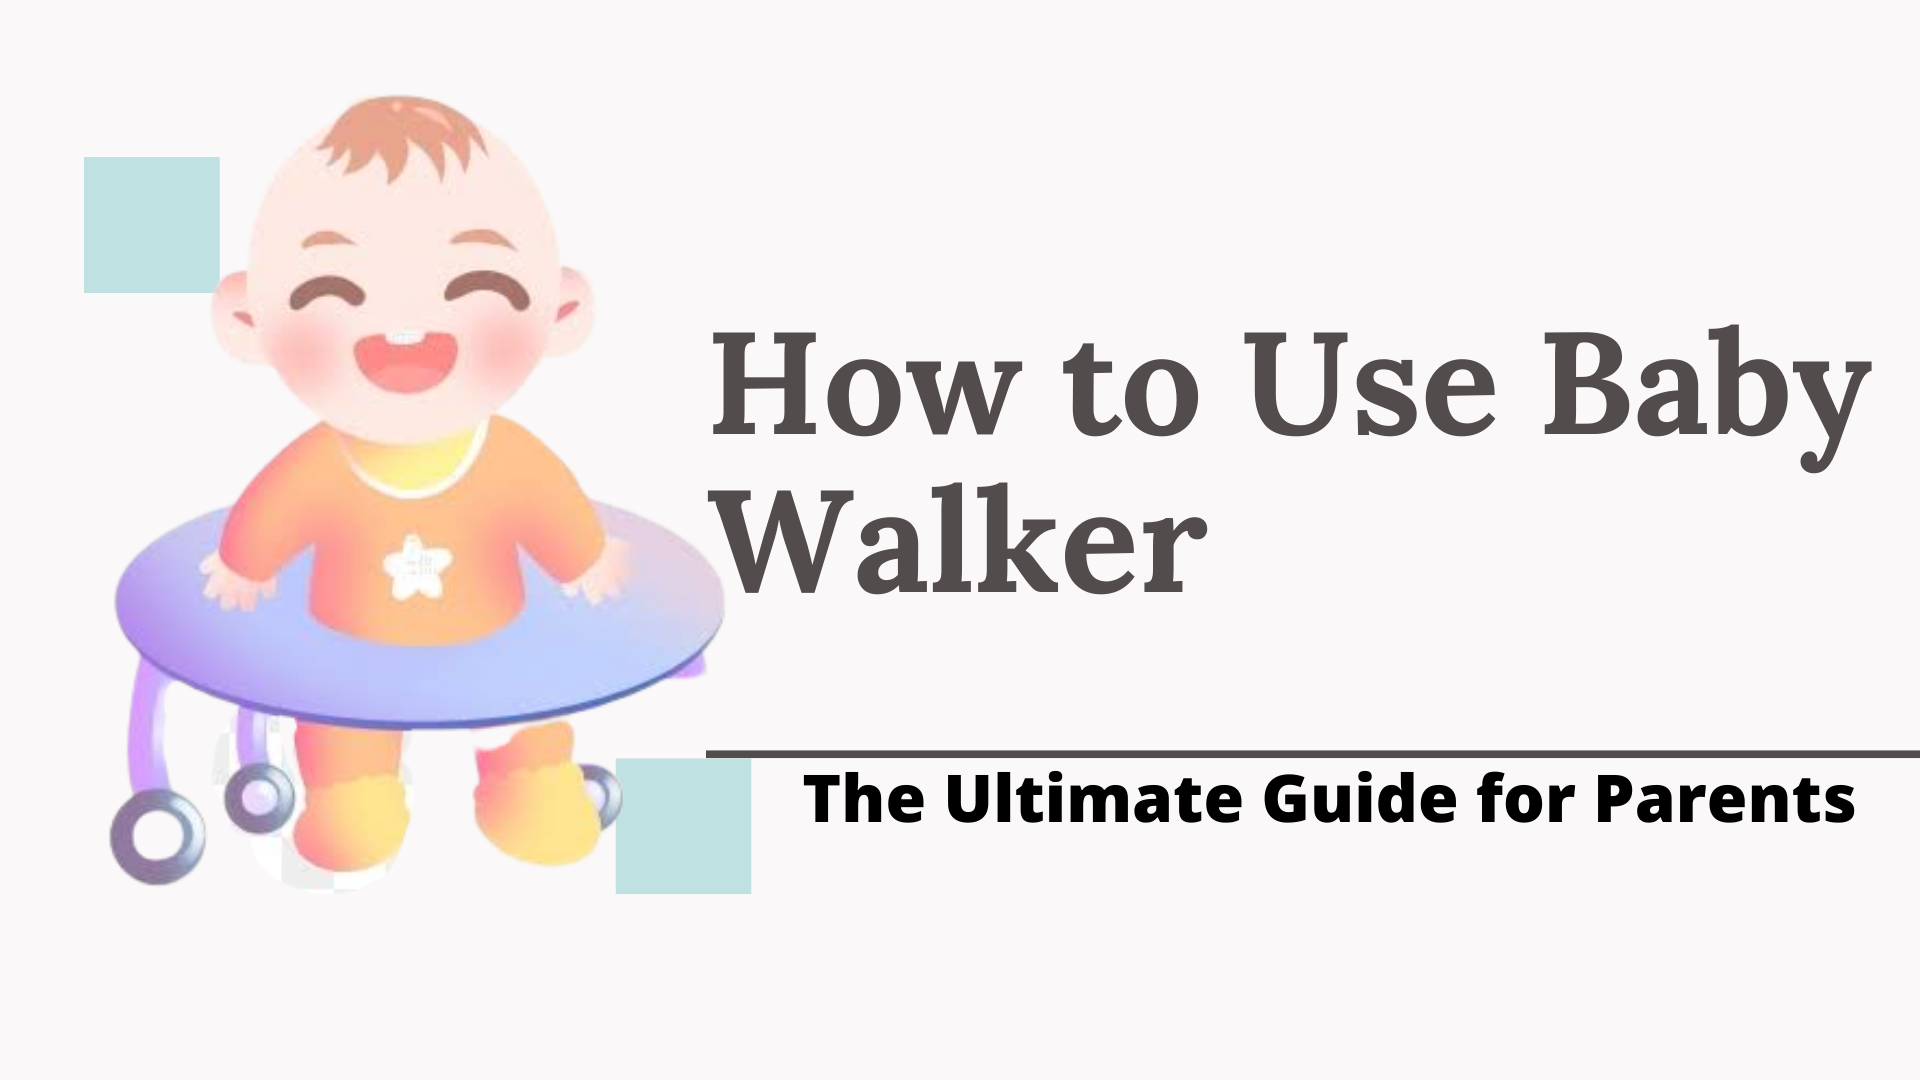 How to use baby walker